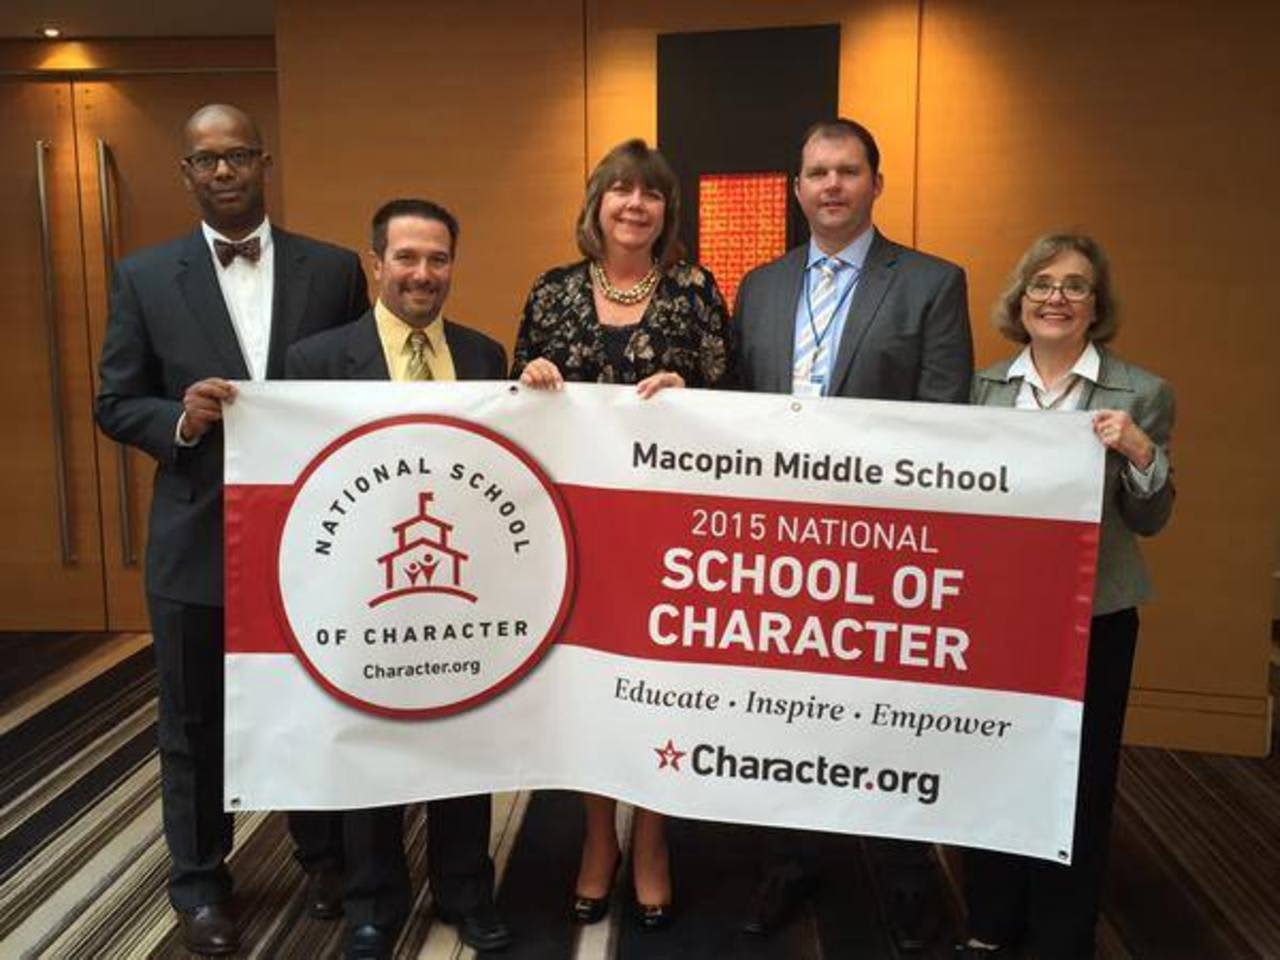 Macopin Middle School was named a "School of Character."